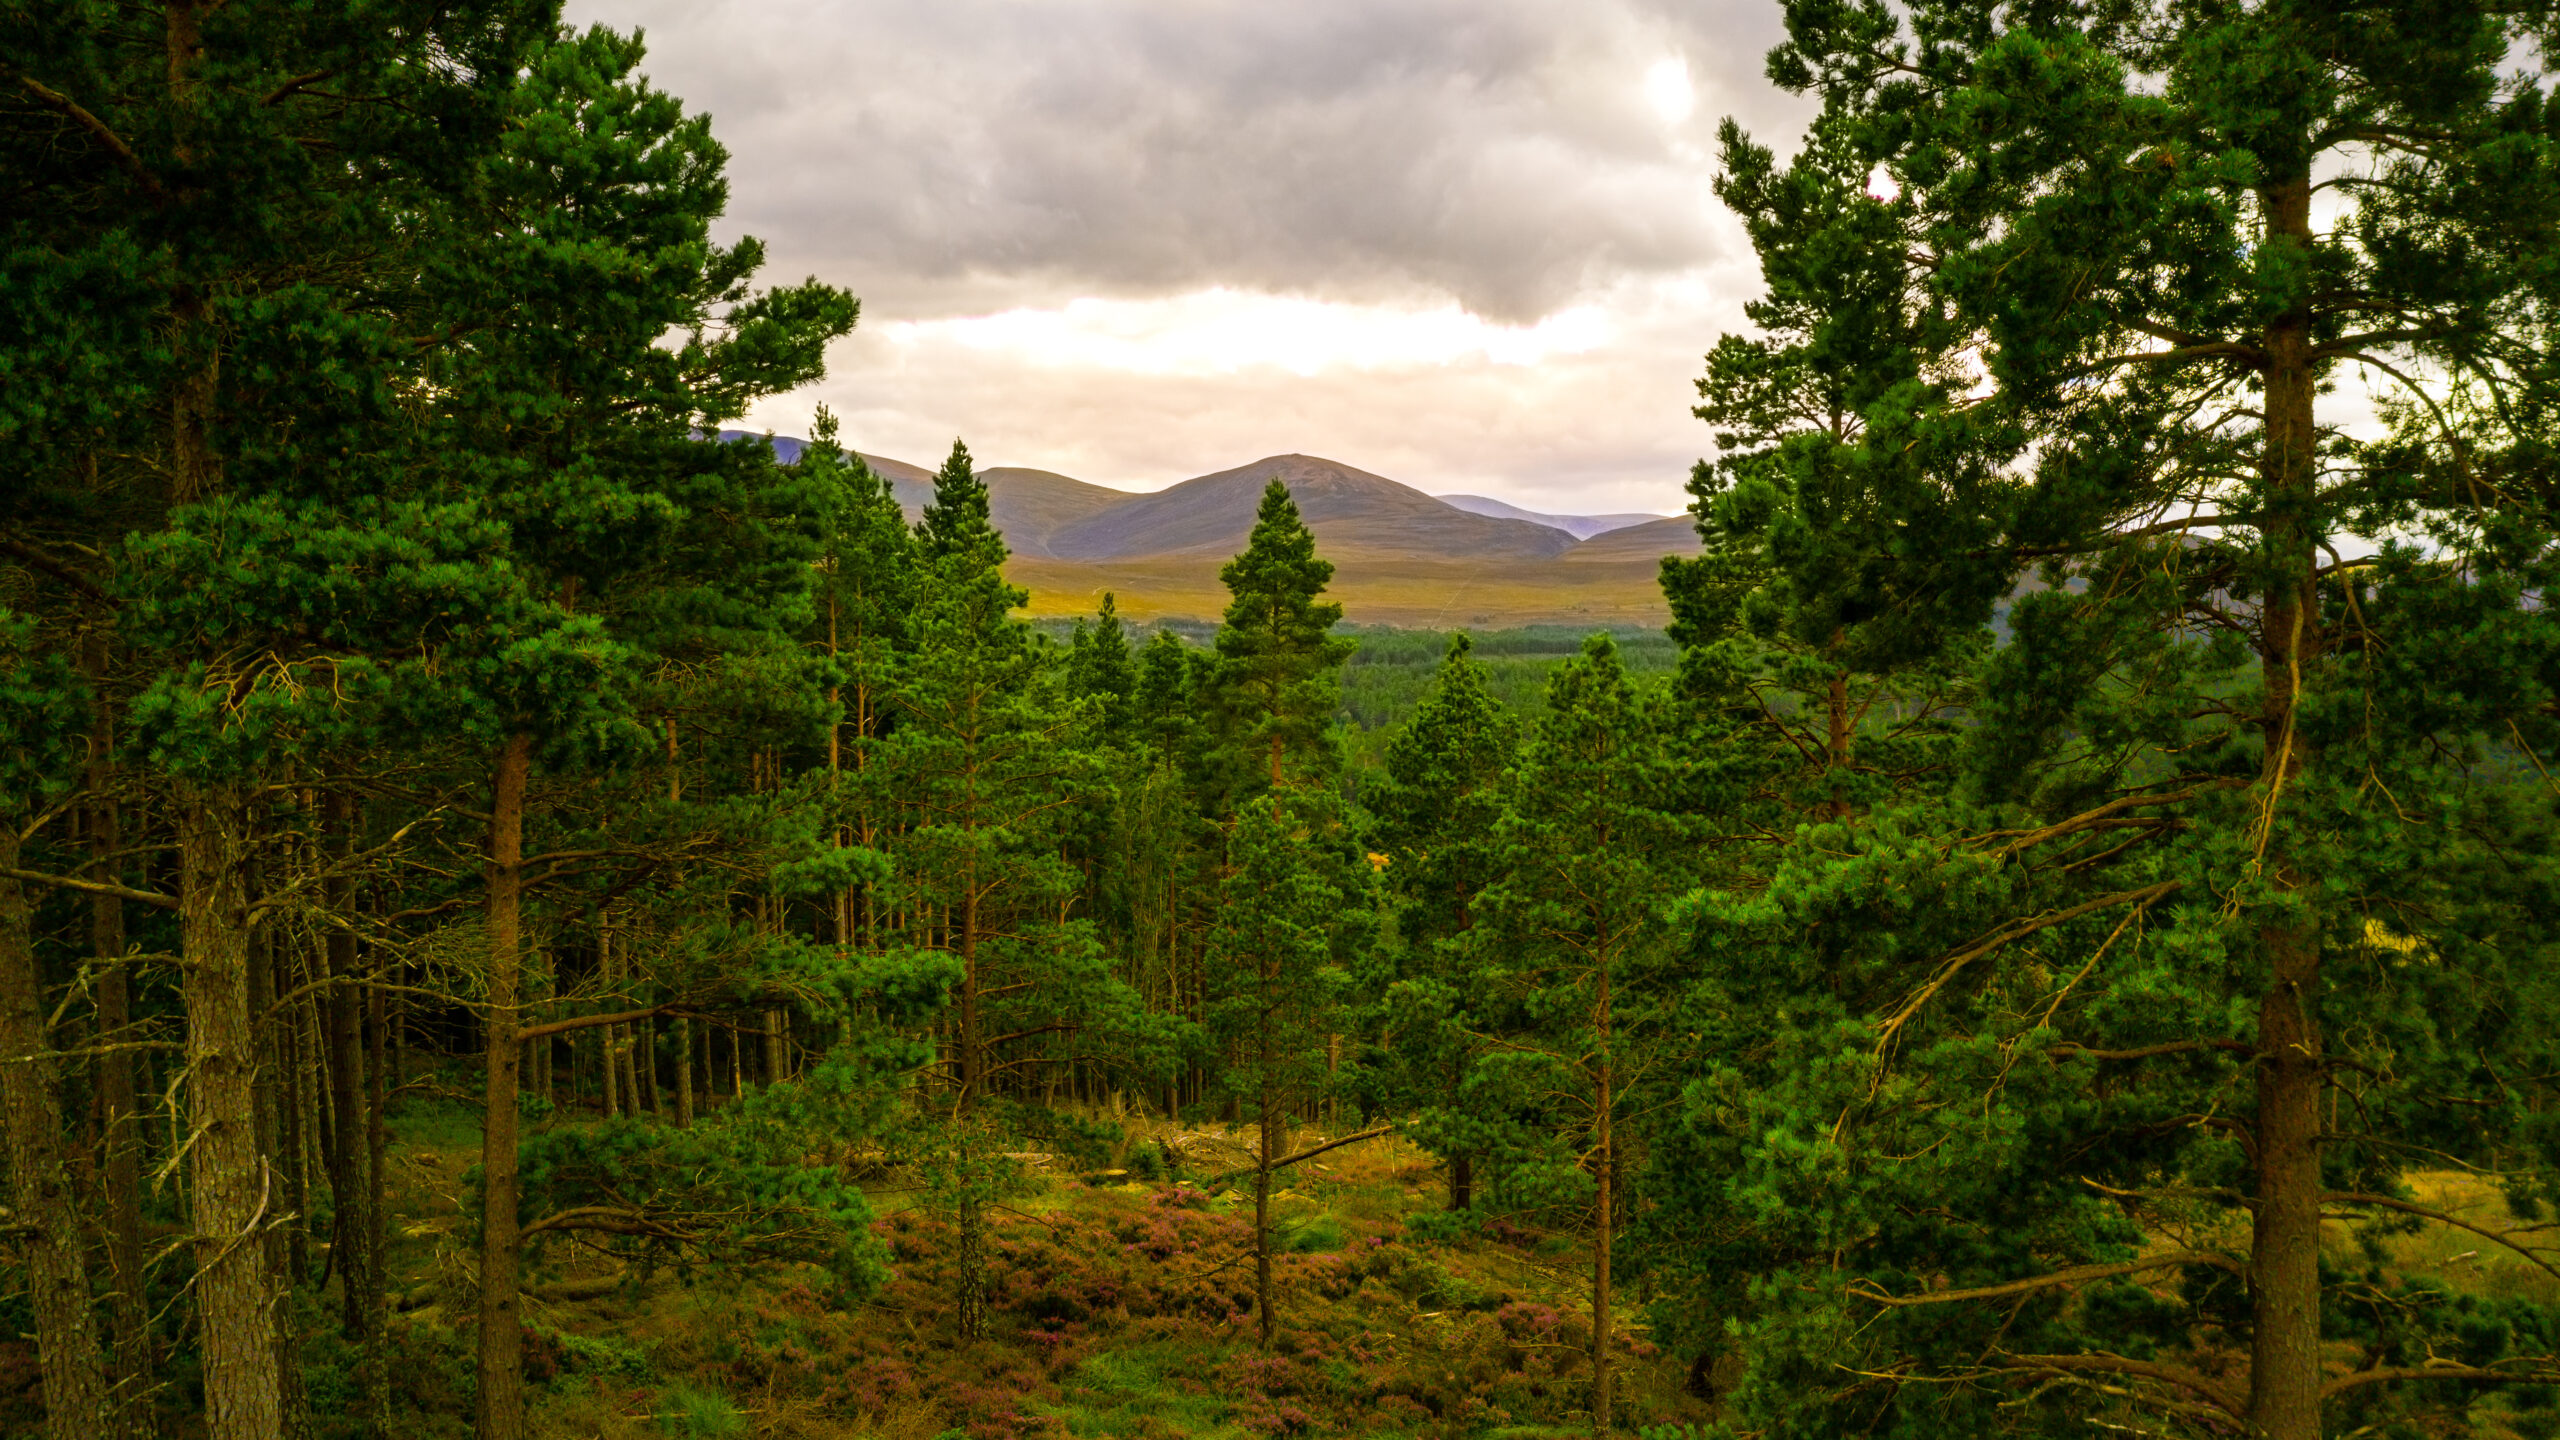 The Cairngorms was the second Scottish National Park